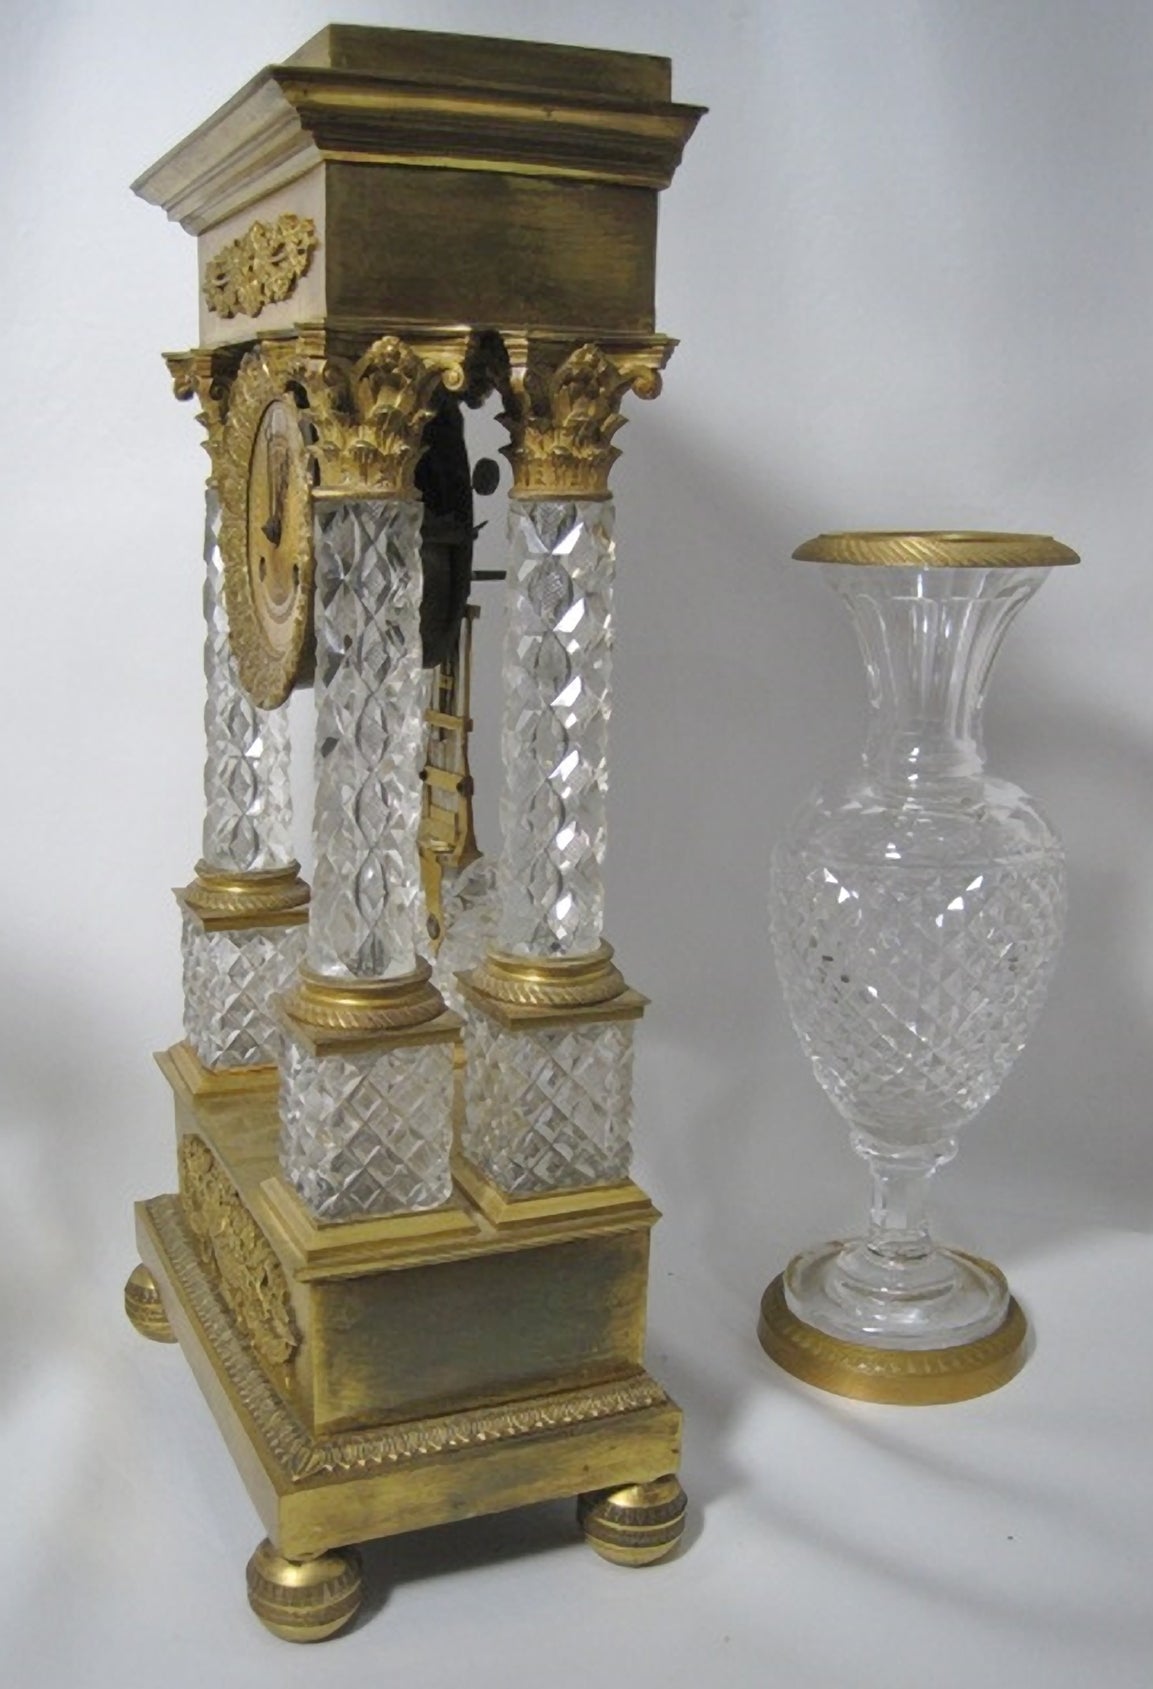 Baccarat Crystal Clock Garniture, French Empire with Gilt Bronze For Sale 2